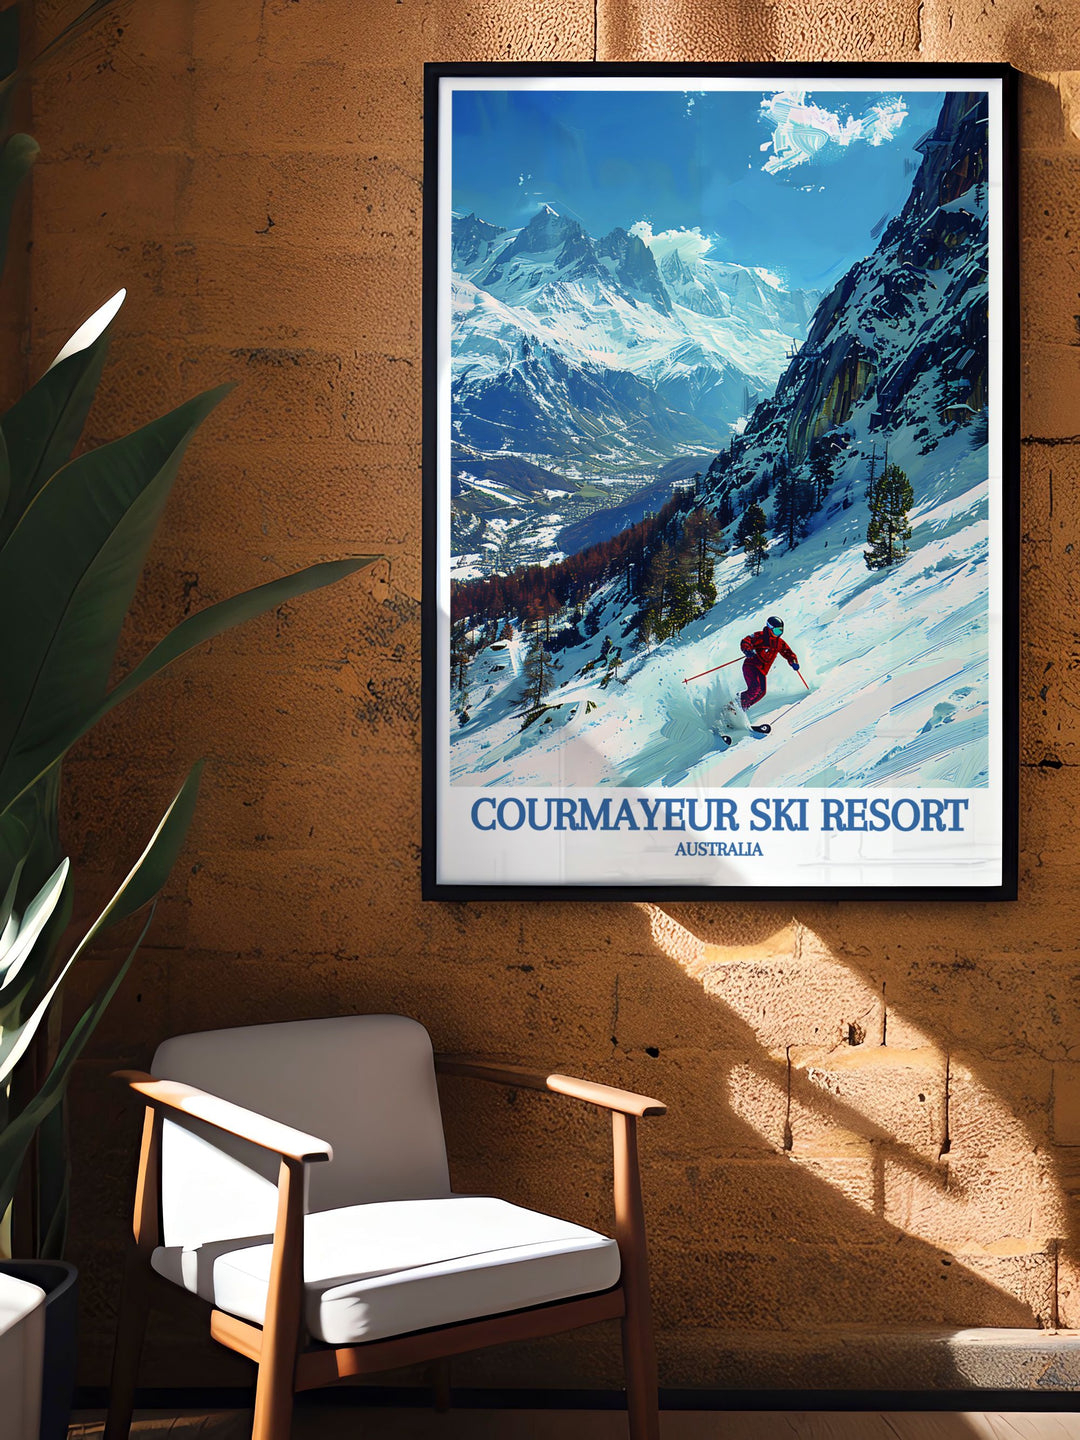 The captivating blend of skiing adventure in Courmayeur and the scenic beauty of Mont Blanc is beautifully illustrated in this poster, making it a stunning addition to any wall art collection celebrating alpine sports.